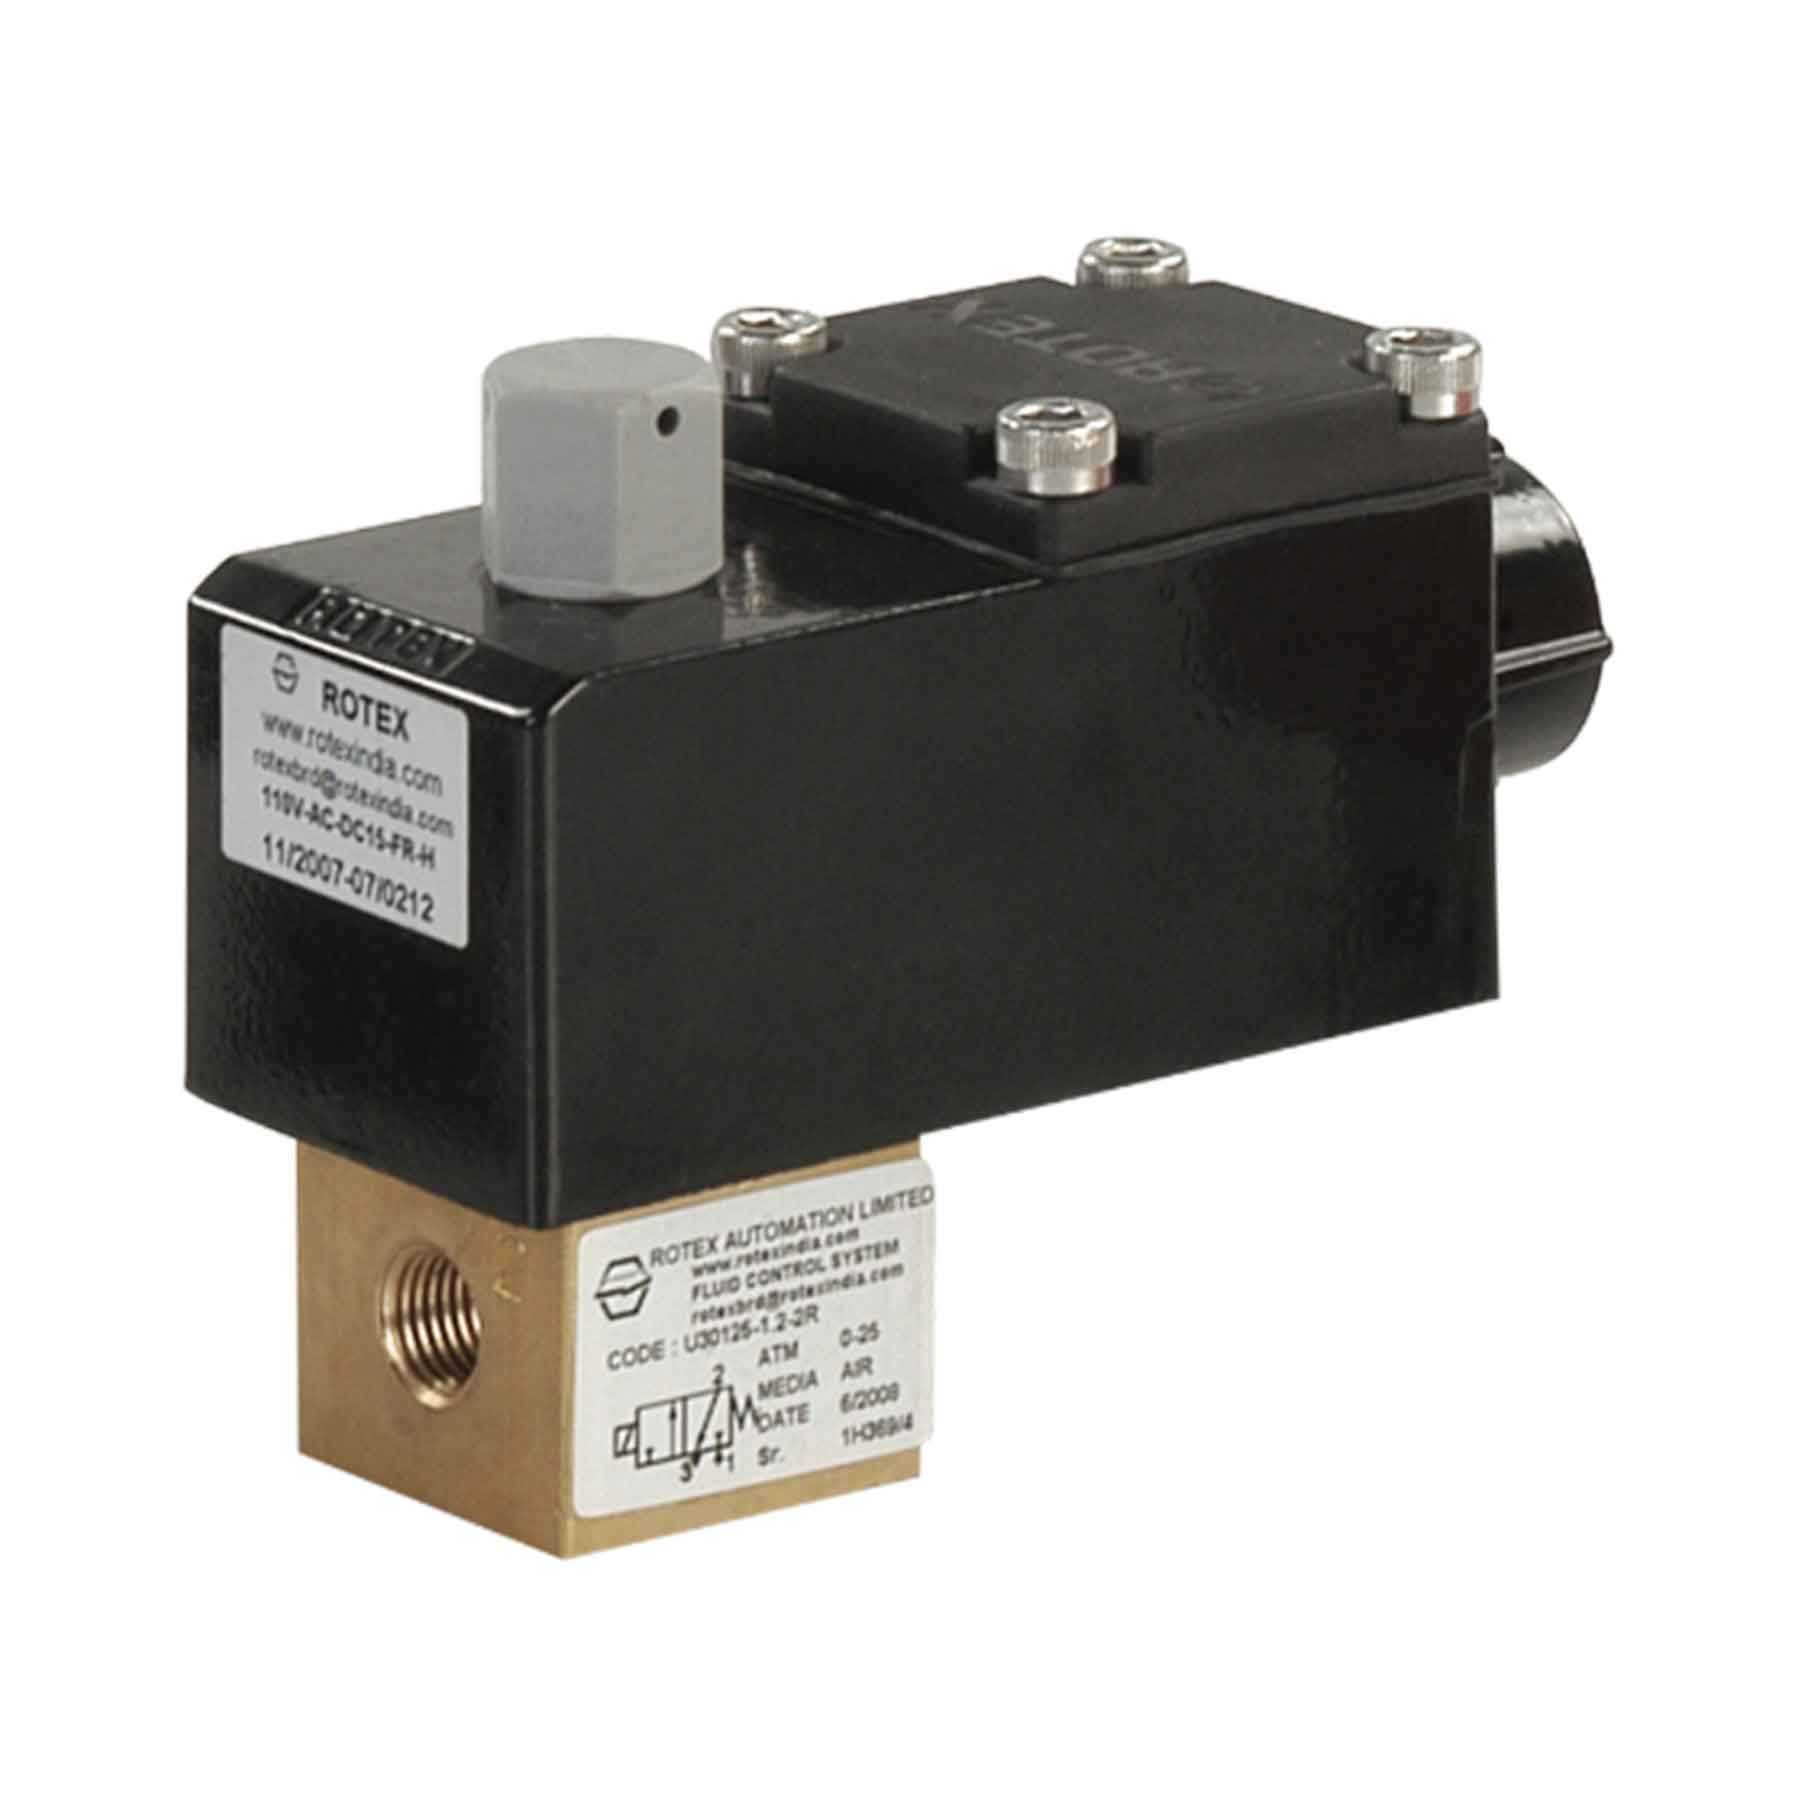 Rotex 2/2-Way Normally Closed Direct Lift Solenoid Valve 20101-1.6-2R-B2+III-24V-AC/DC-19-FR-H-CE